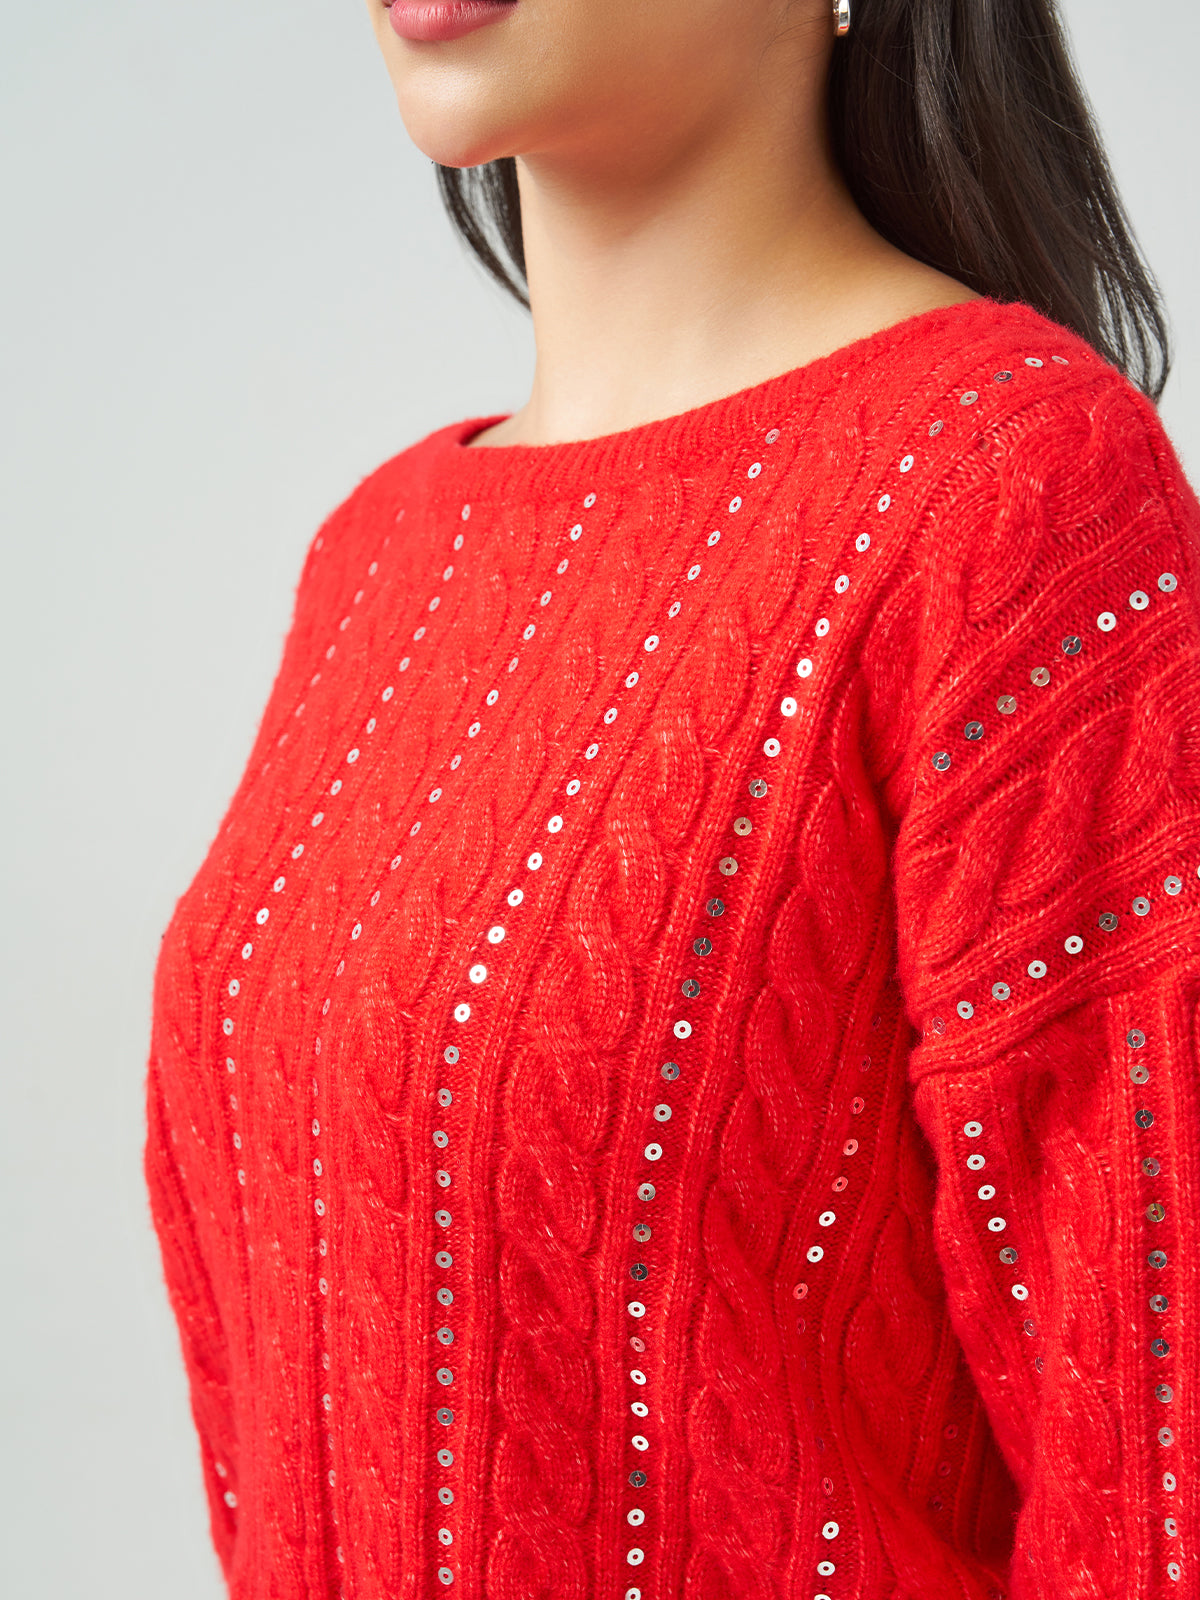 Boatneck Sequin Cable Sweater